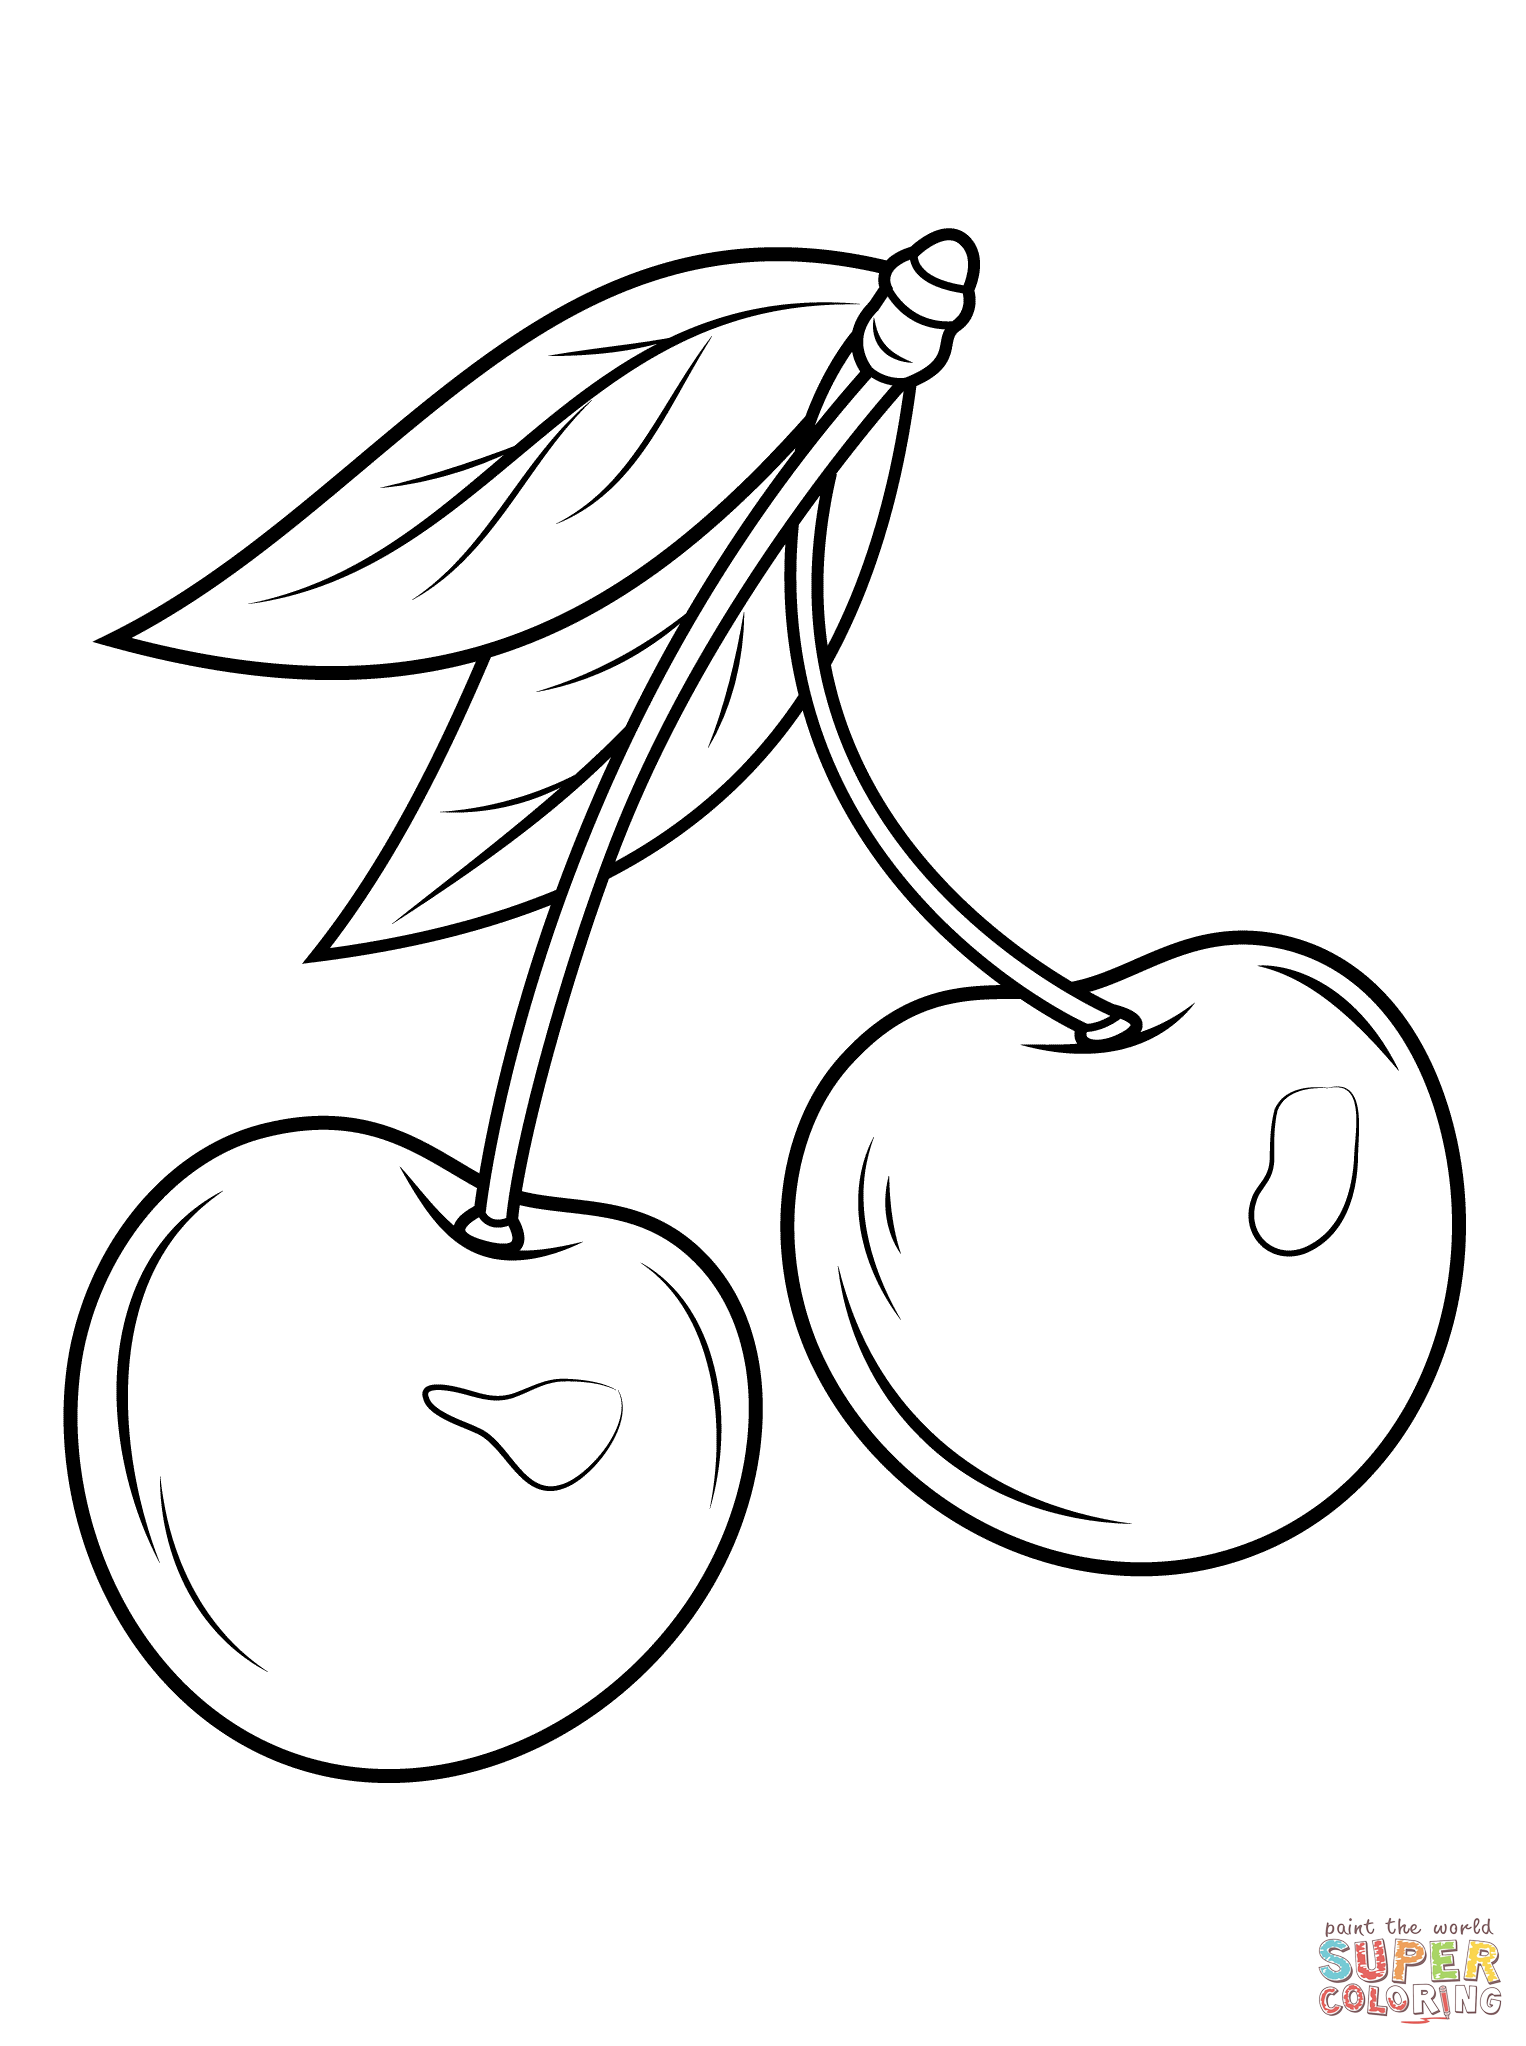 Cherry Drawing Image